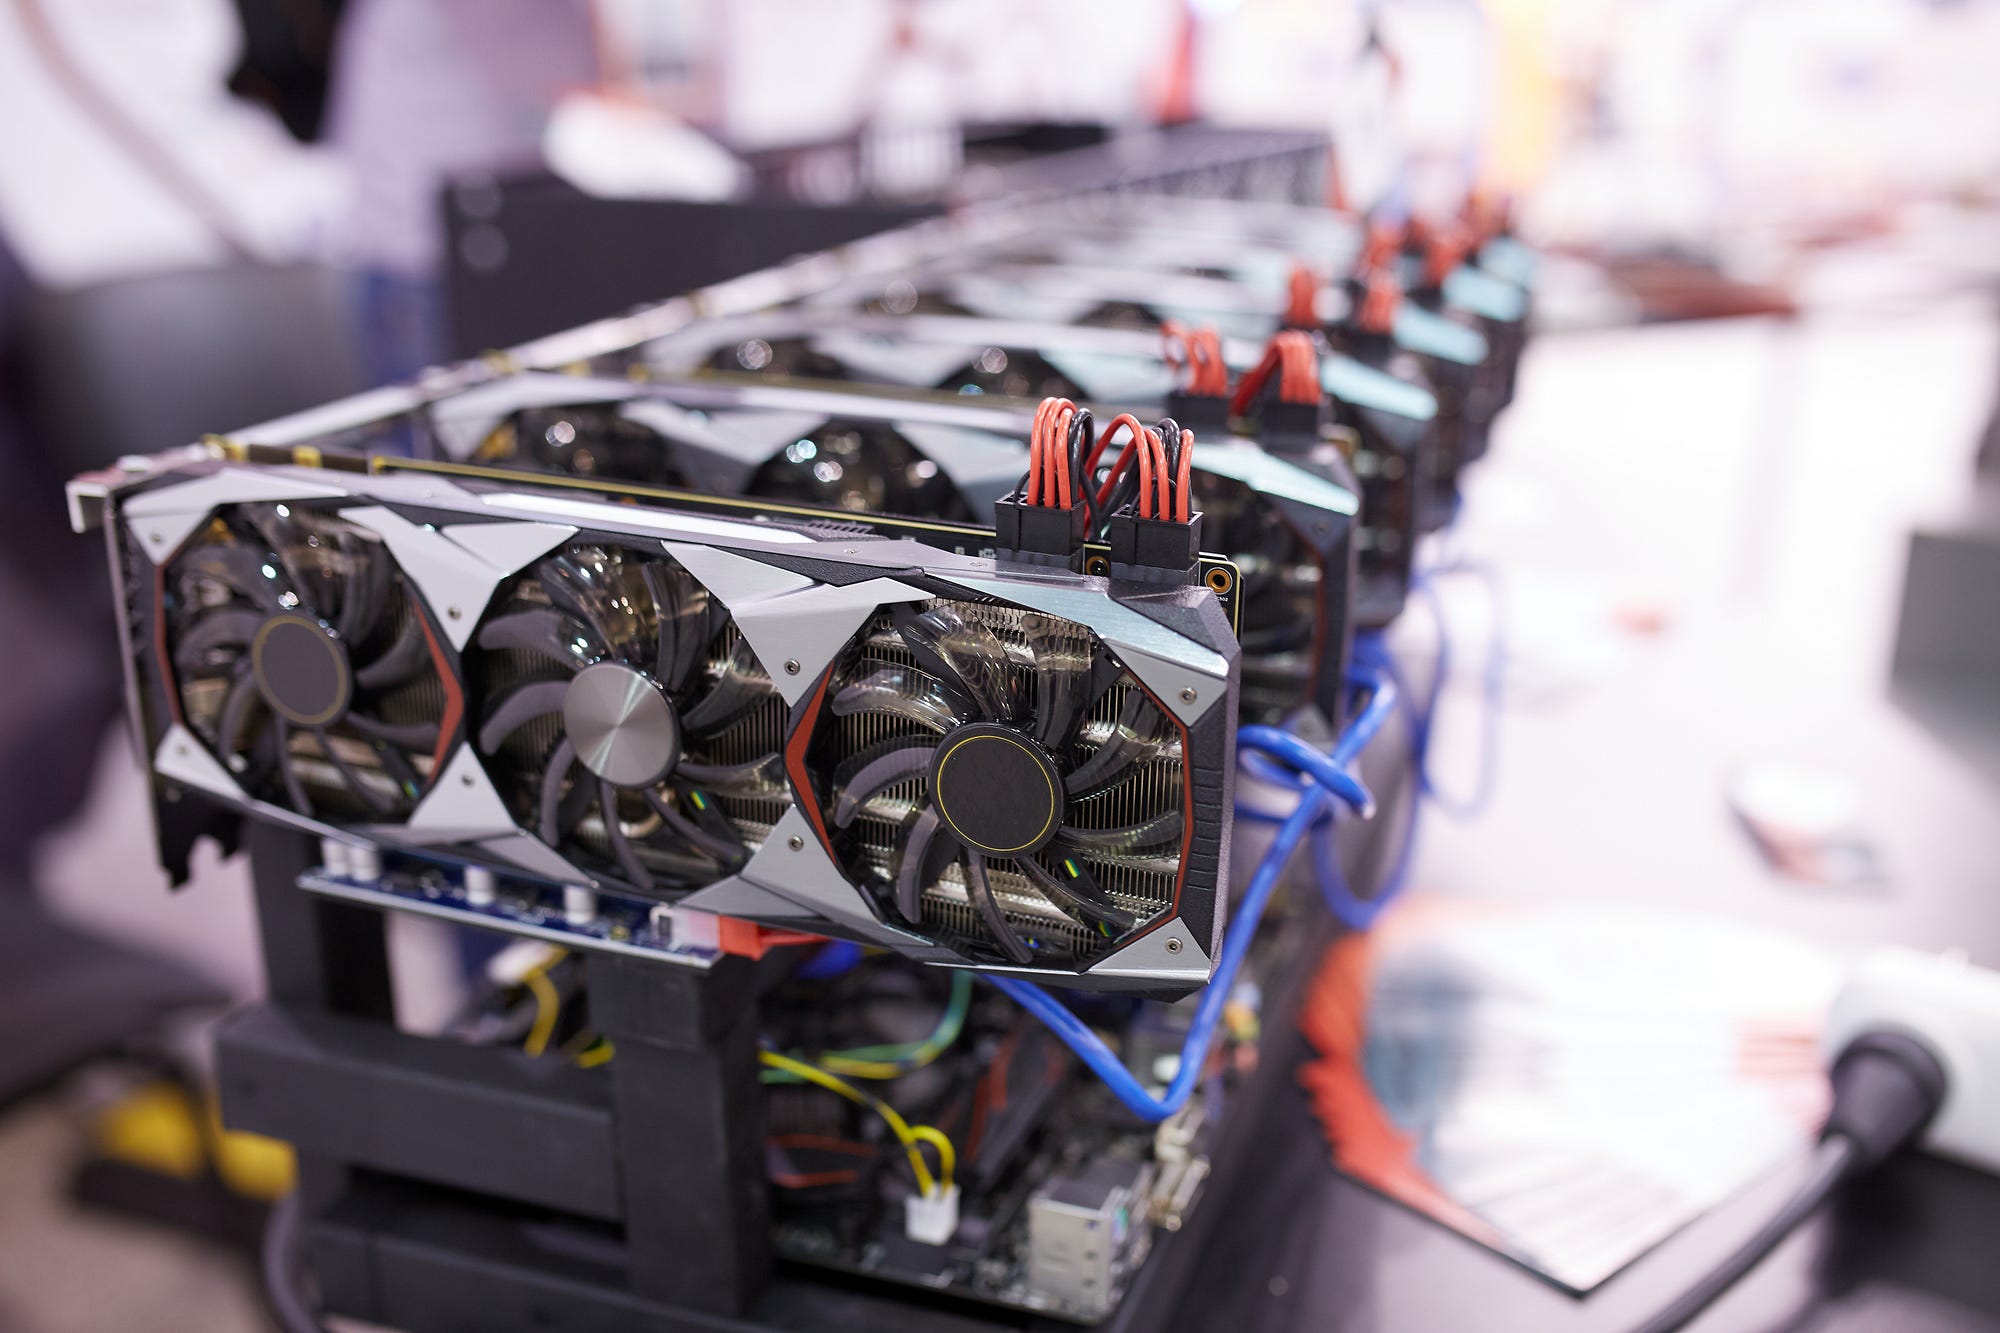 Best 5 GPUs for Mining in 2021. Let's take a look at what are the best… |  by Ubuntu | SimpleMining | Medium